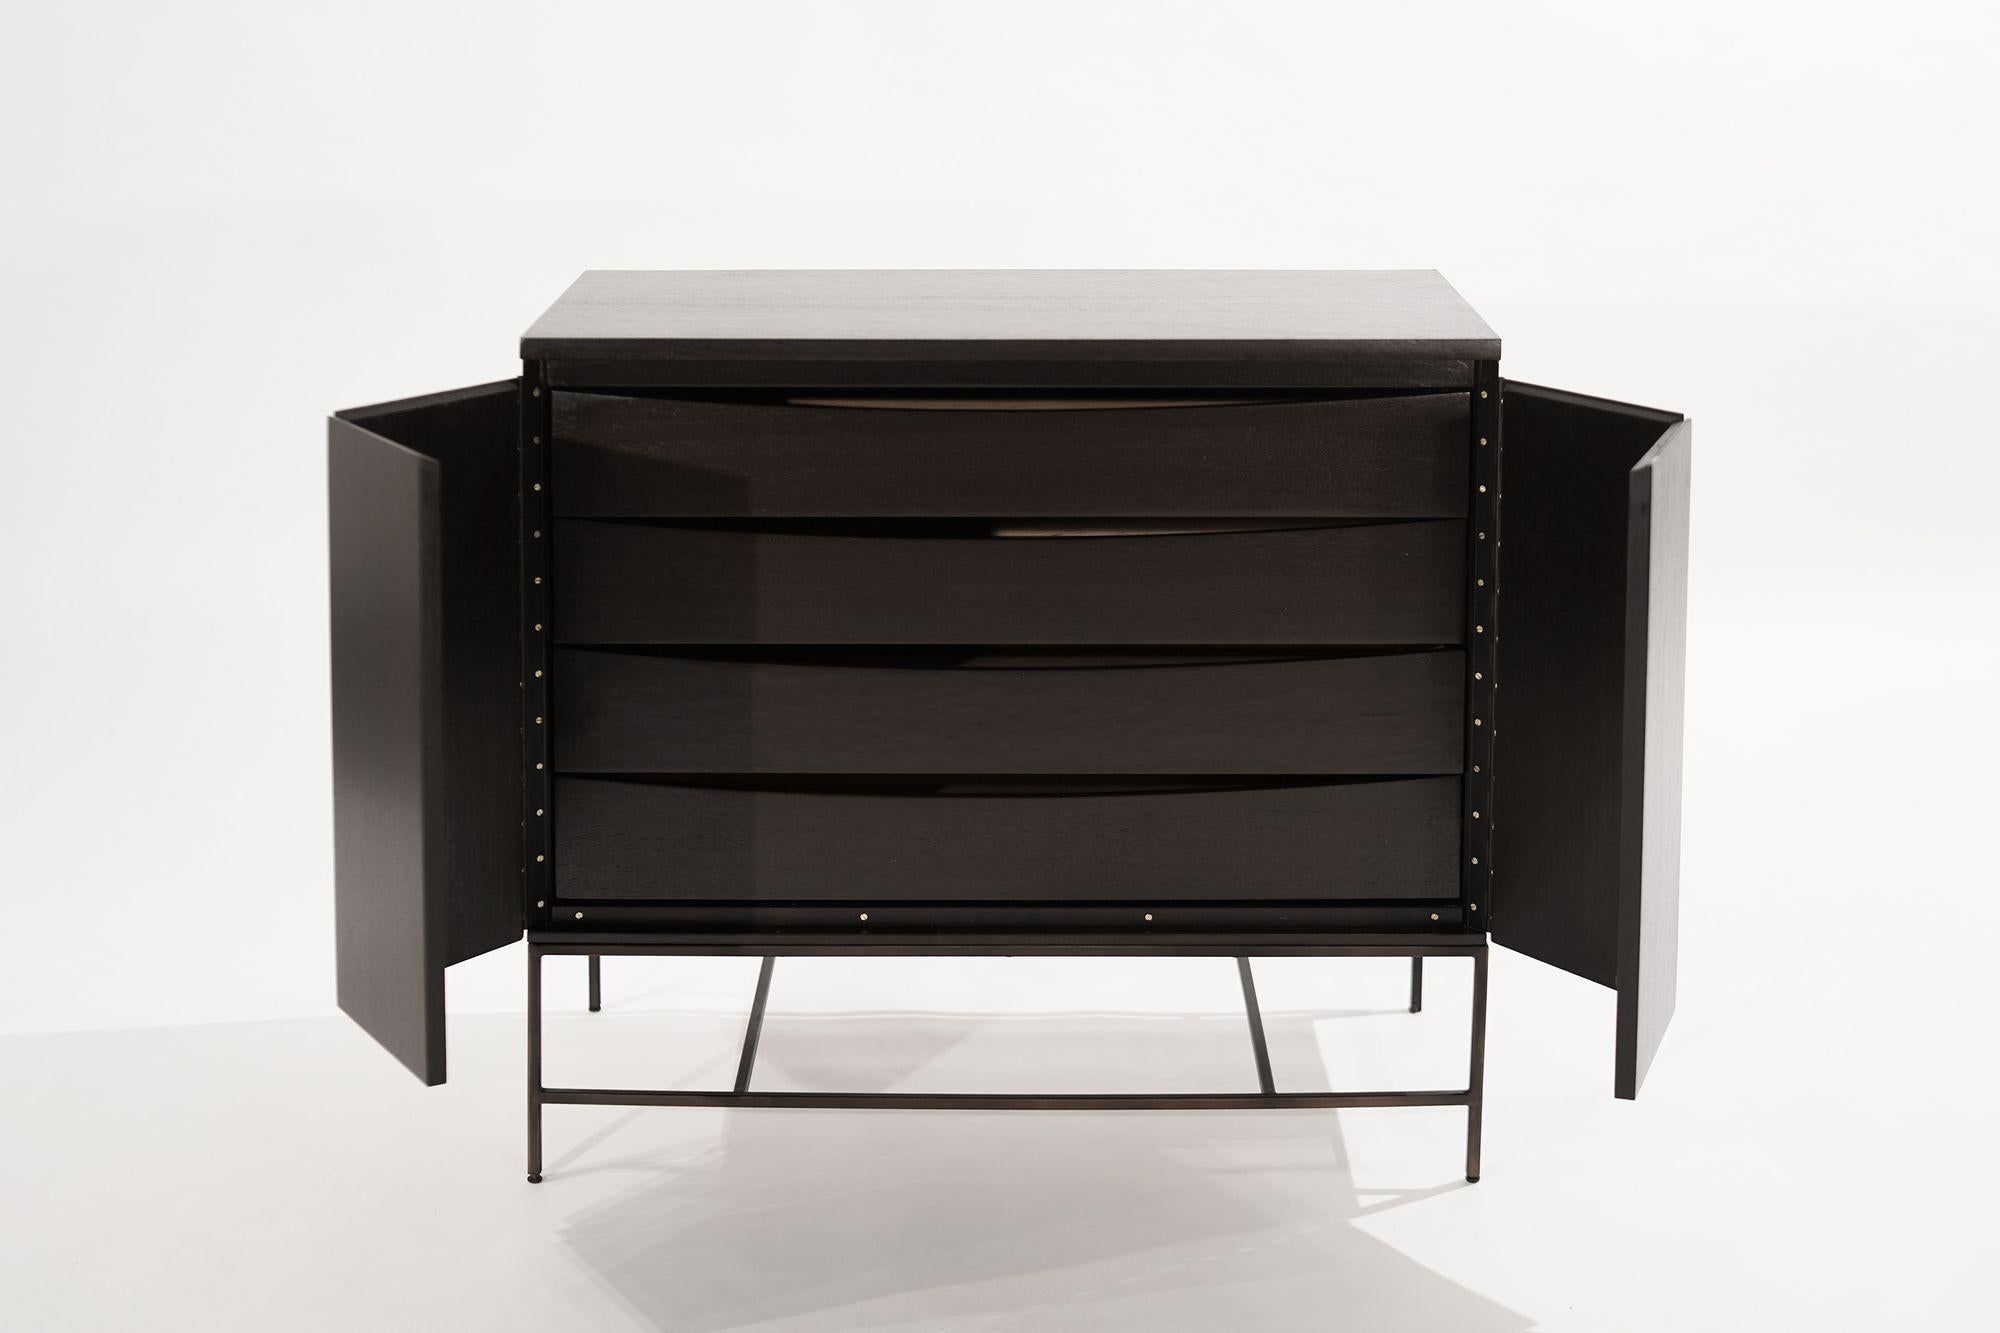 American Bronze and Ebony Cabinet by Paul McCobb, Calvin Group, C. 1950s